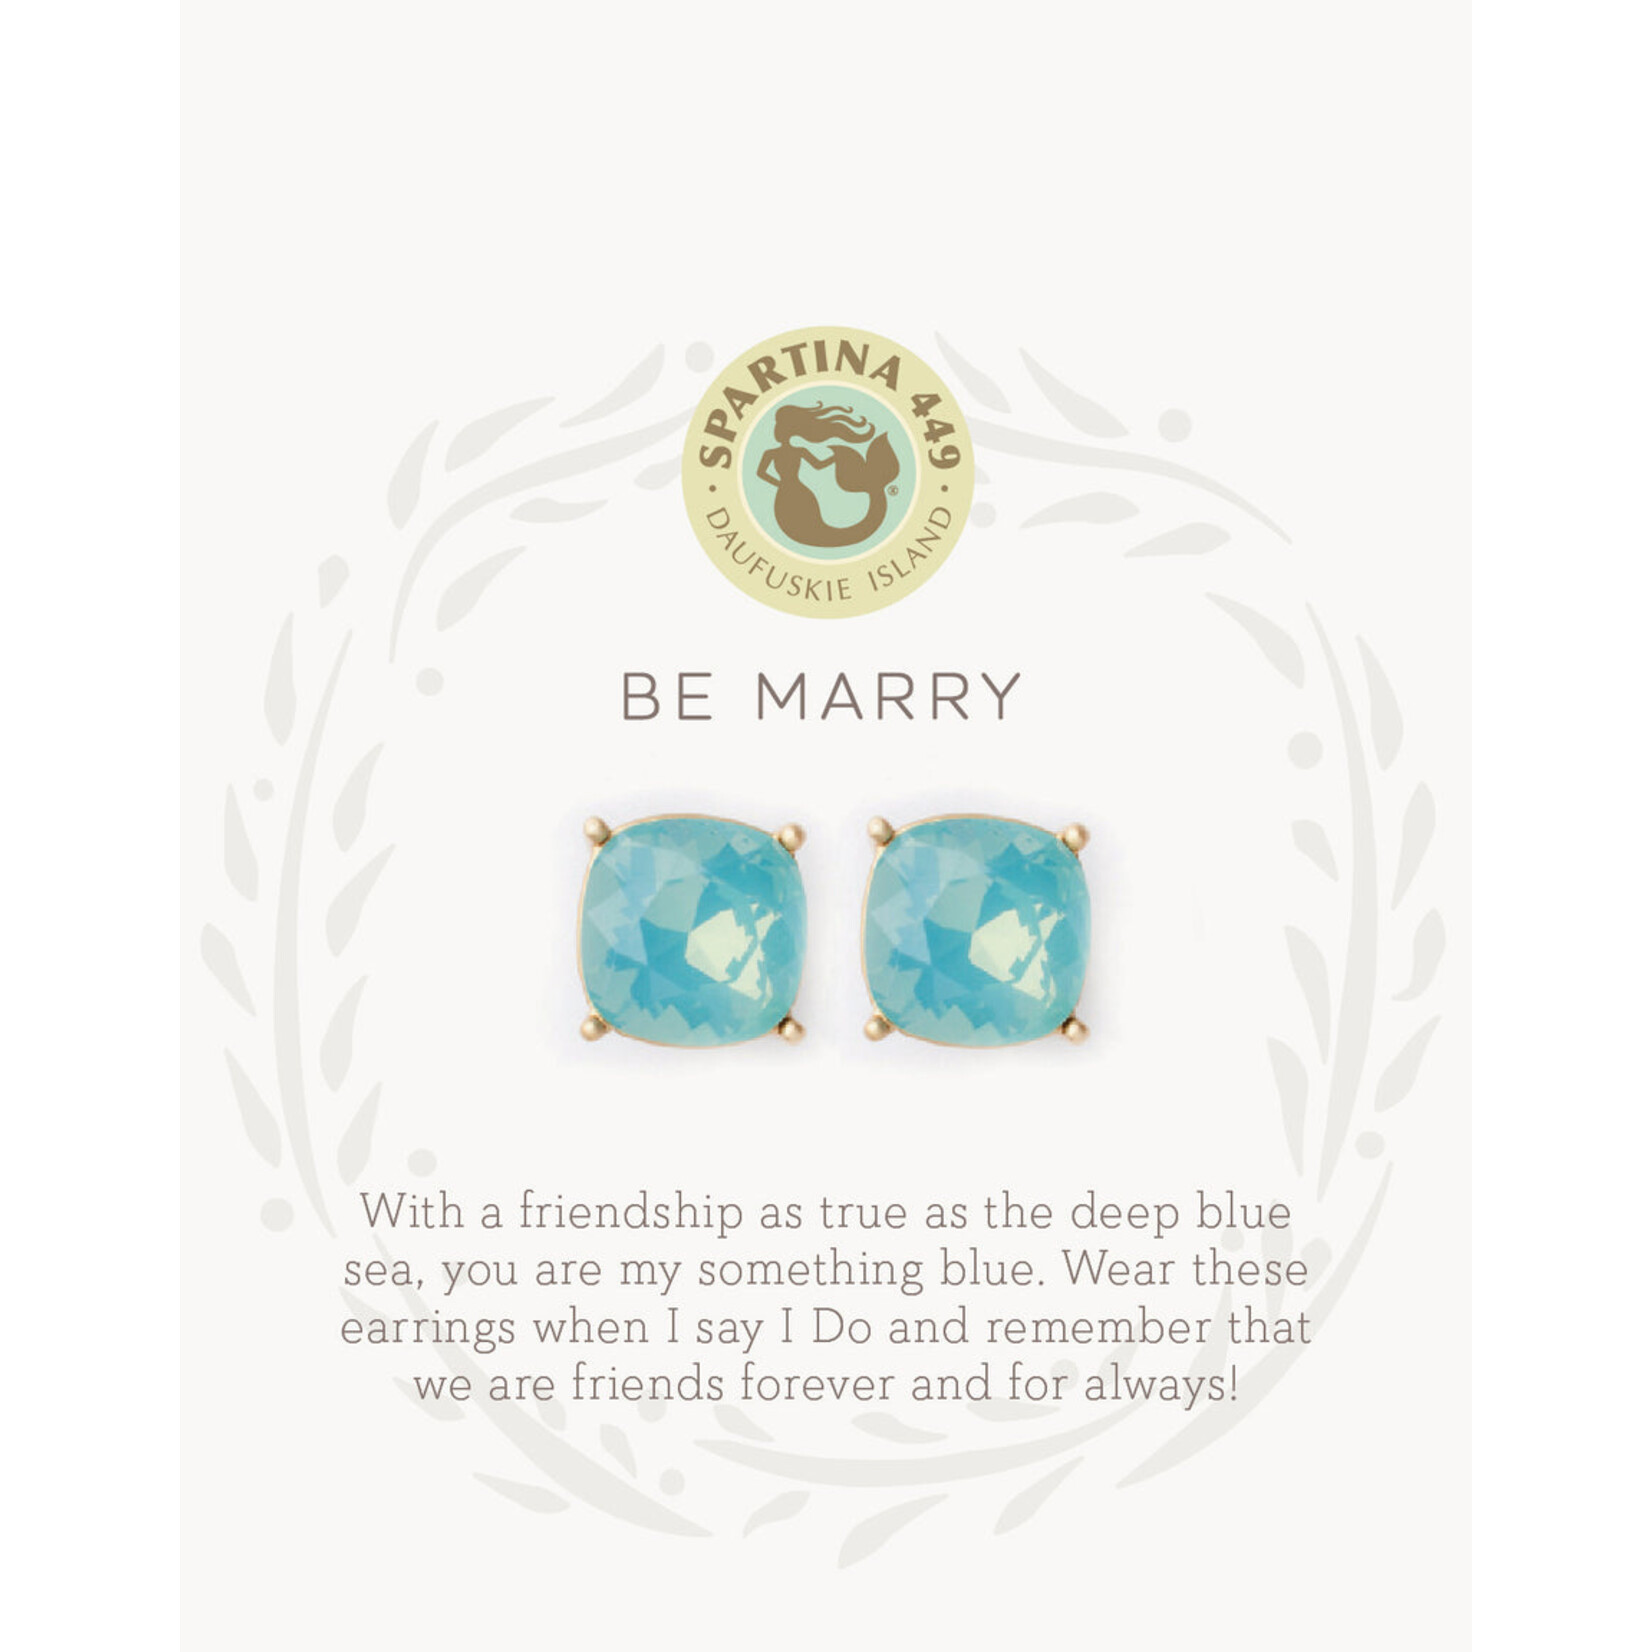 Spartina Spartina Sea La Vie Be Marry/Something Blue Stud Earrings